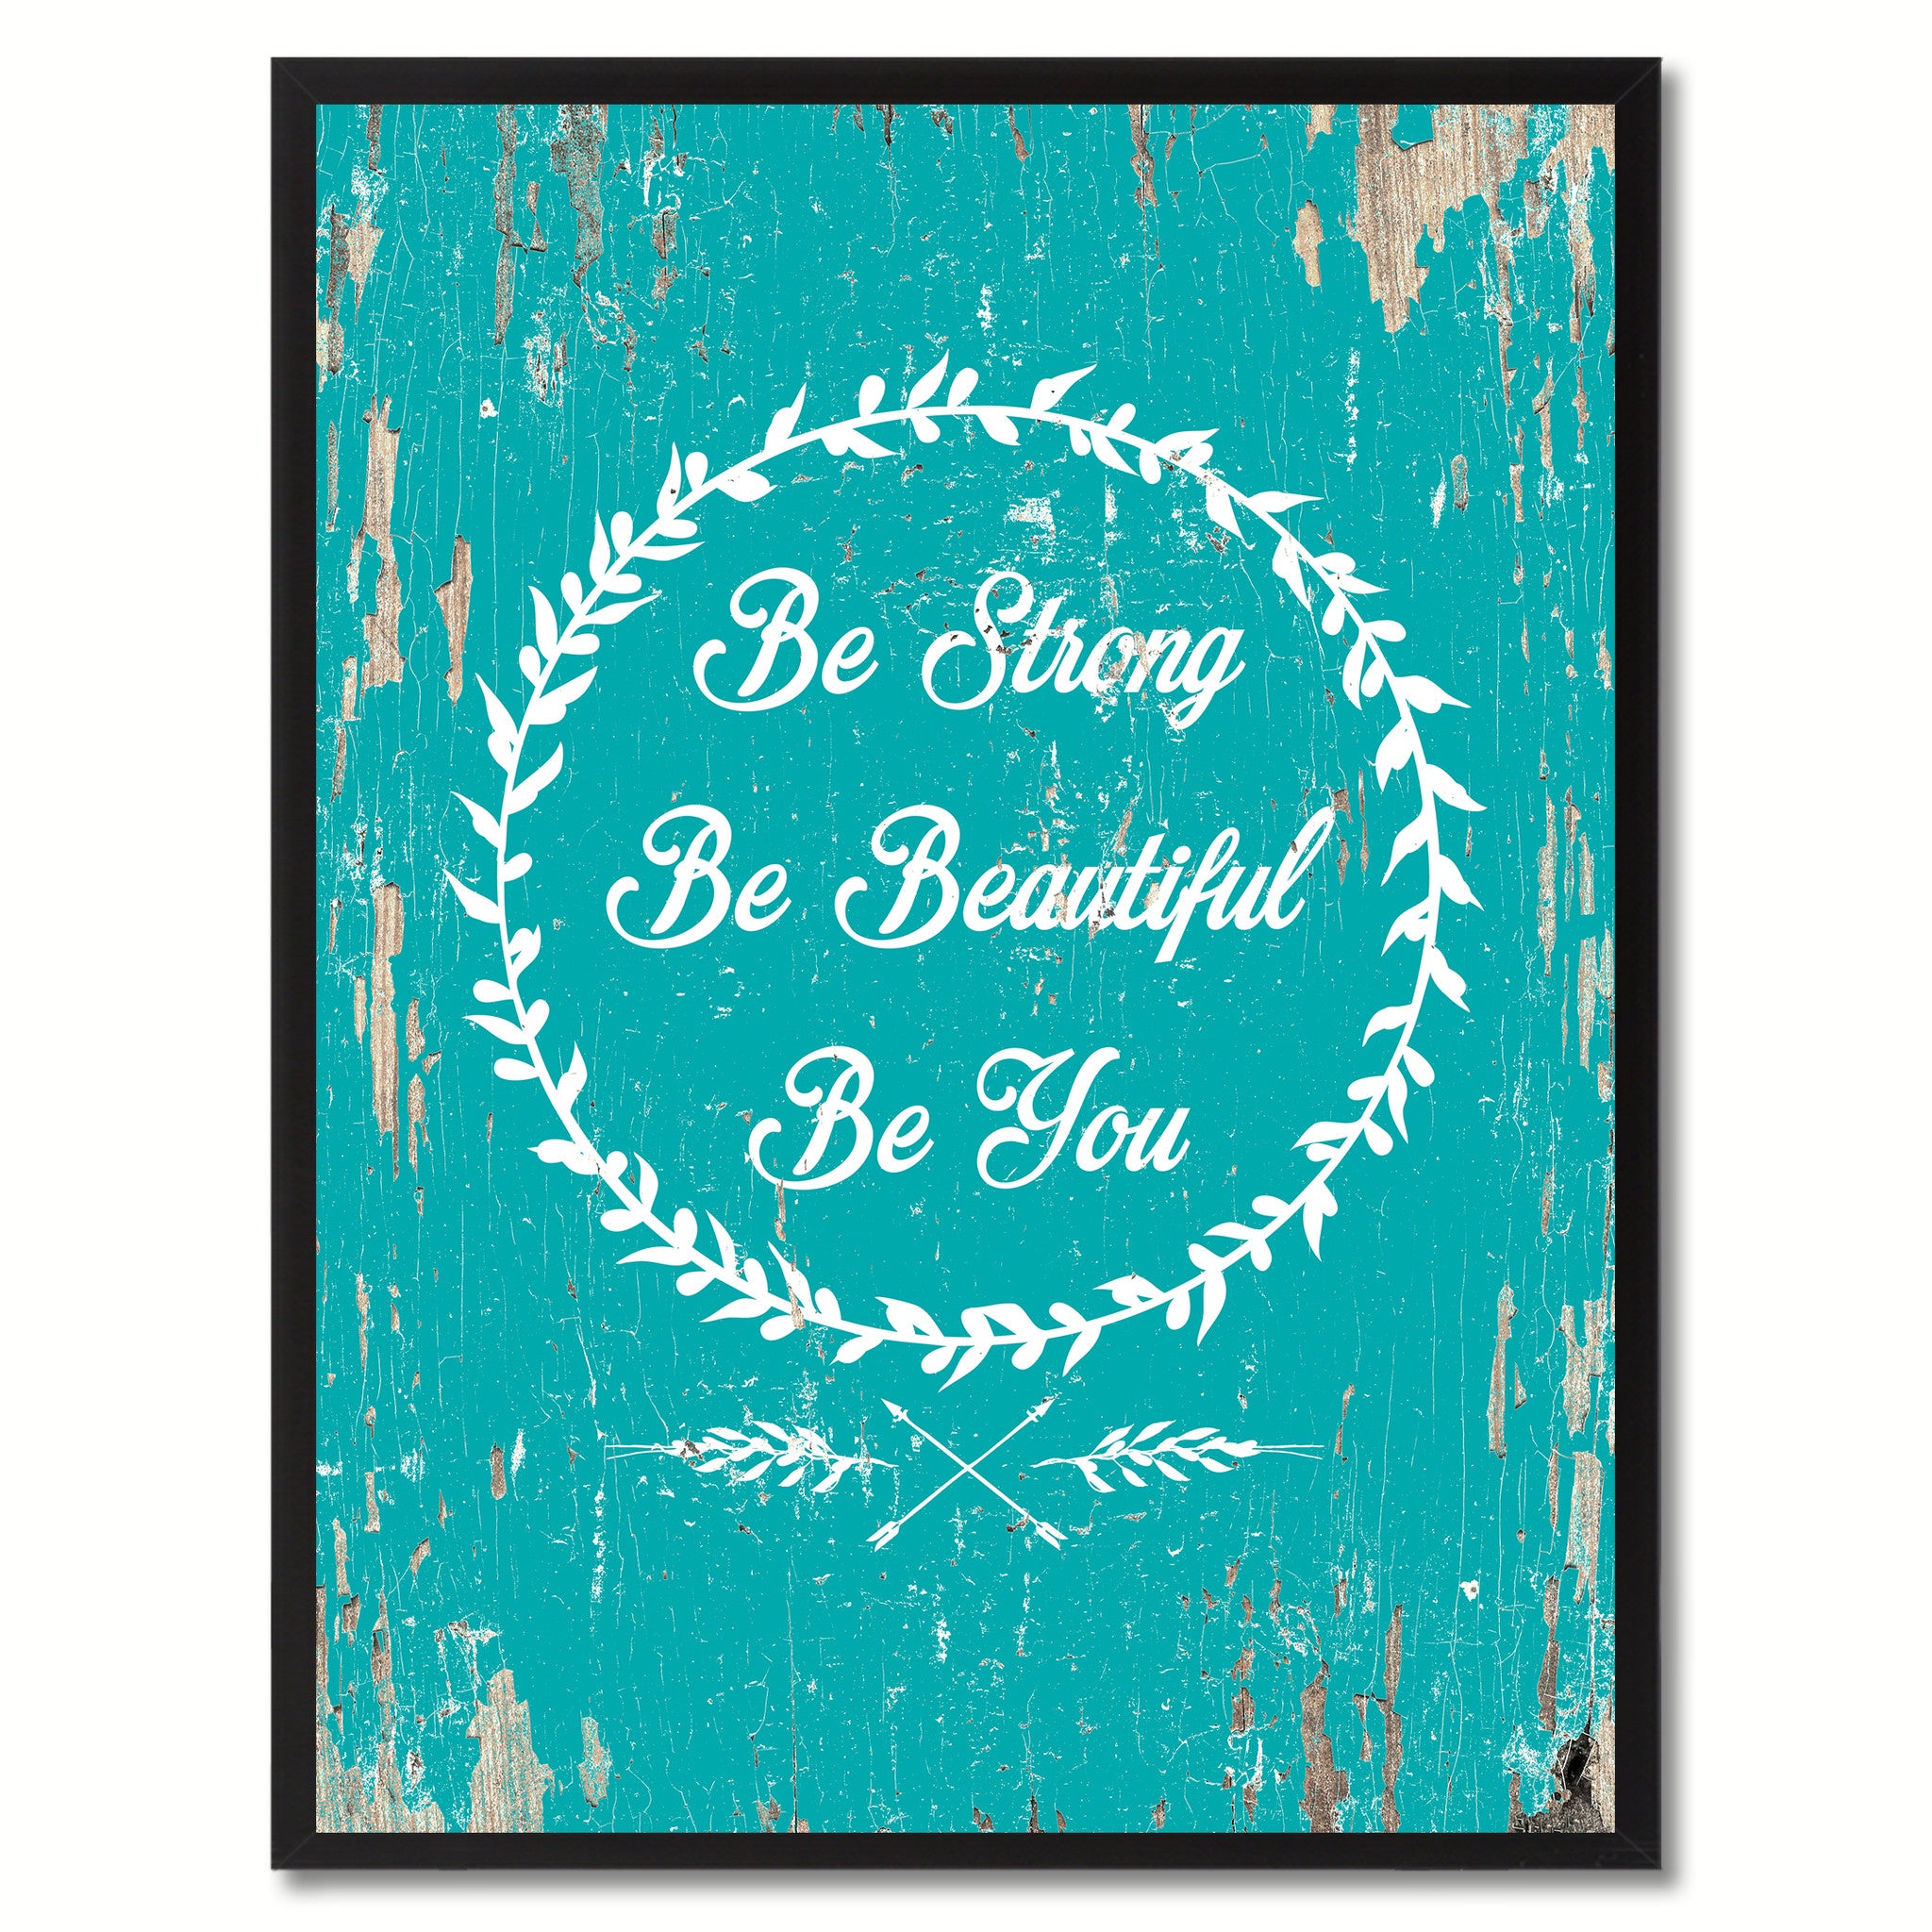 Be strong be beautiful be you Inspirational Quote Saying Gift Ideas Home Decor Wall Art